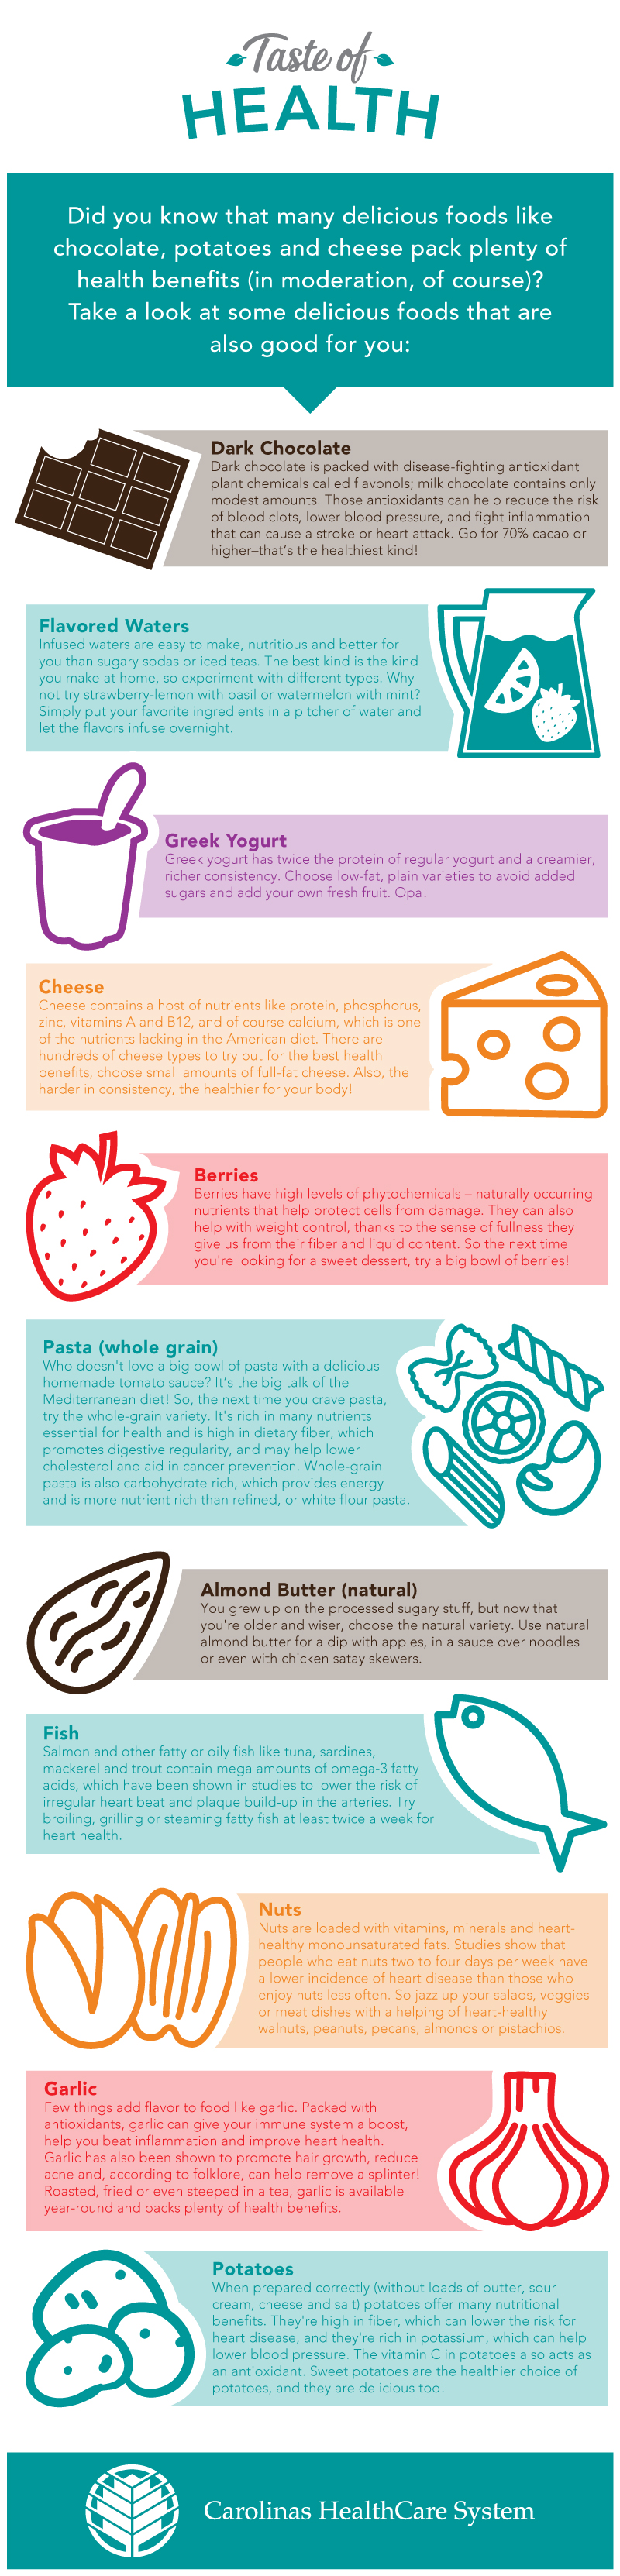 Foods that are Delicious and Good for You